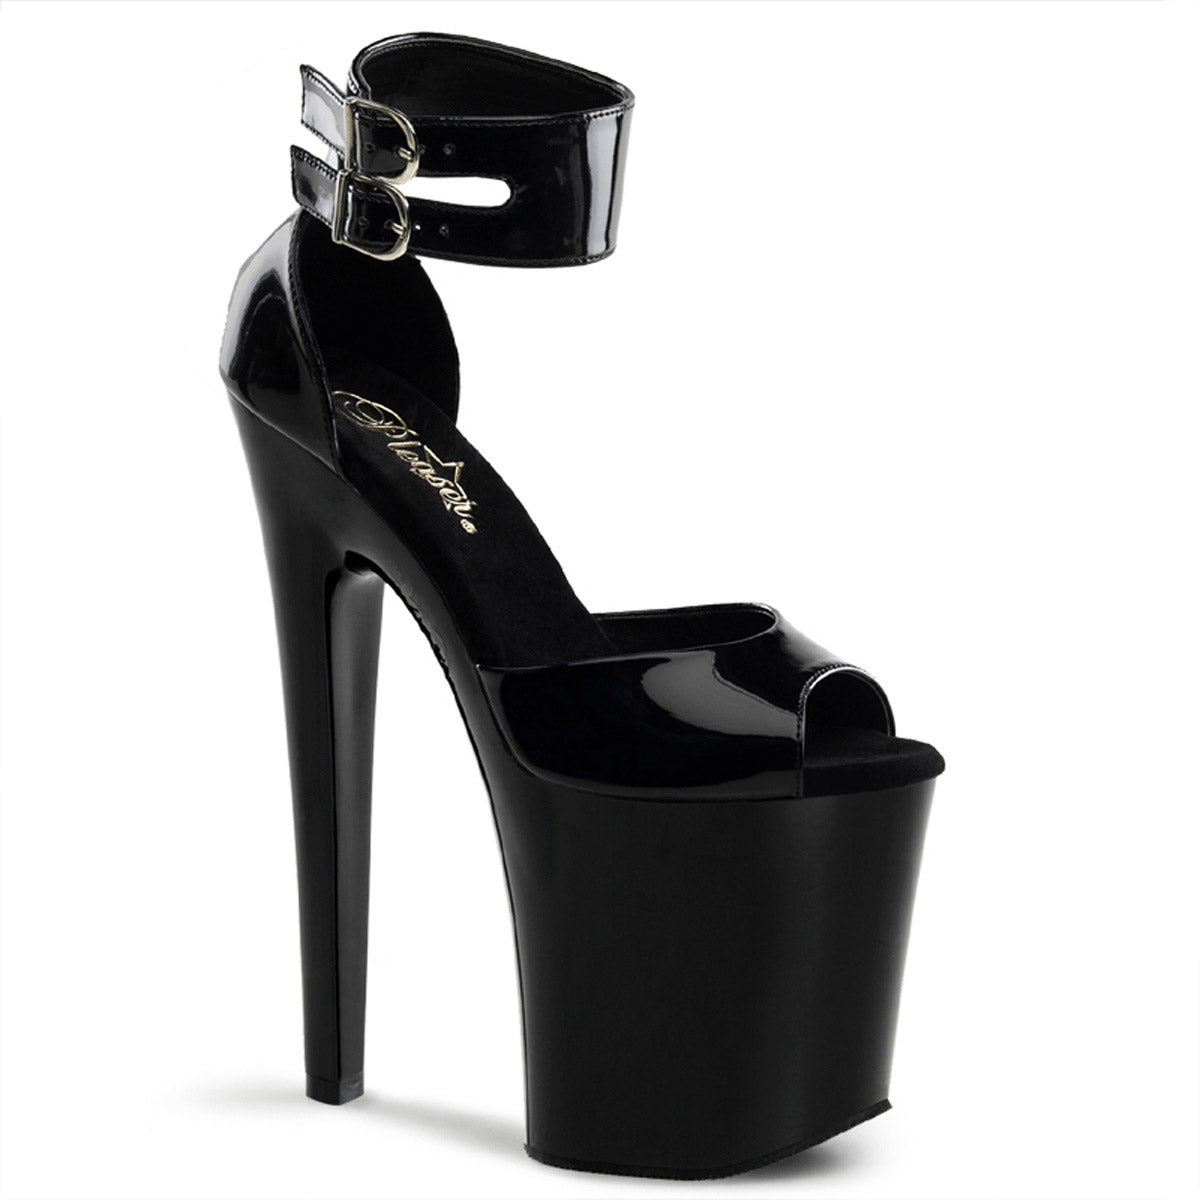 Sexy Ankle Cuff Peep Toe D'Orsay Platform Stiletto High Heels Shoes Pleaser Pleaser XTREME/875